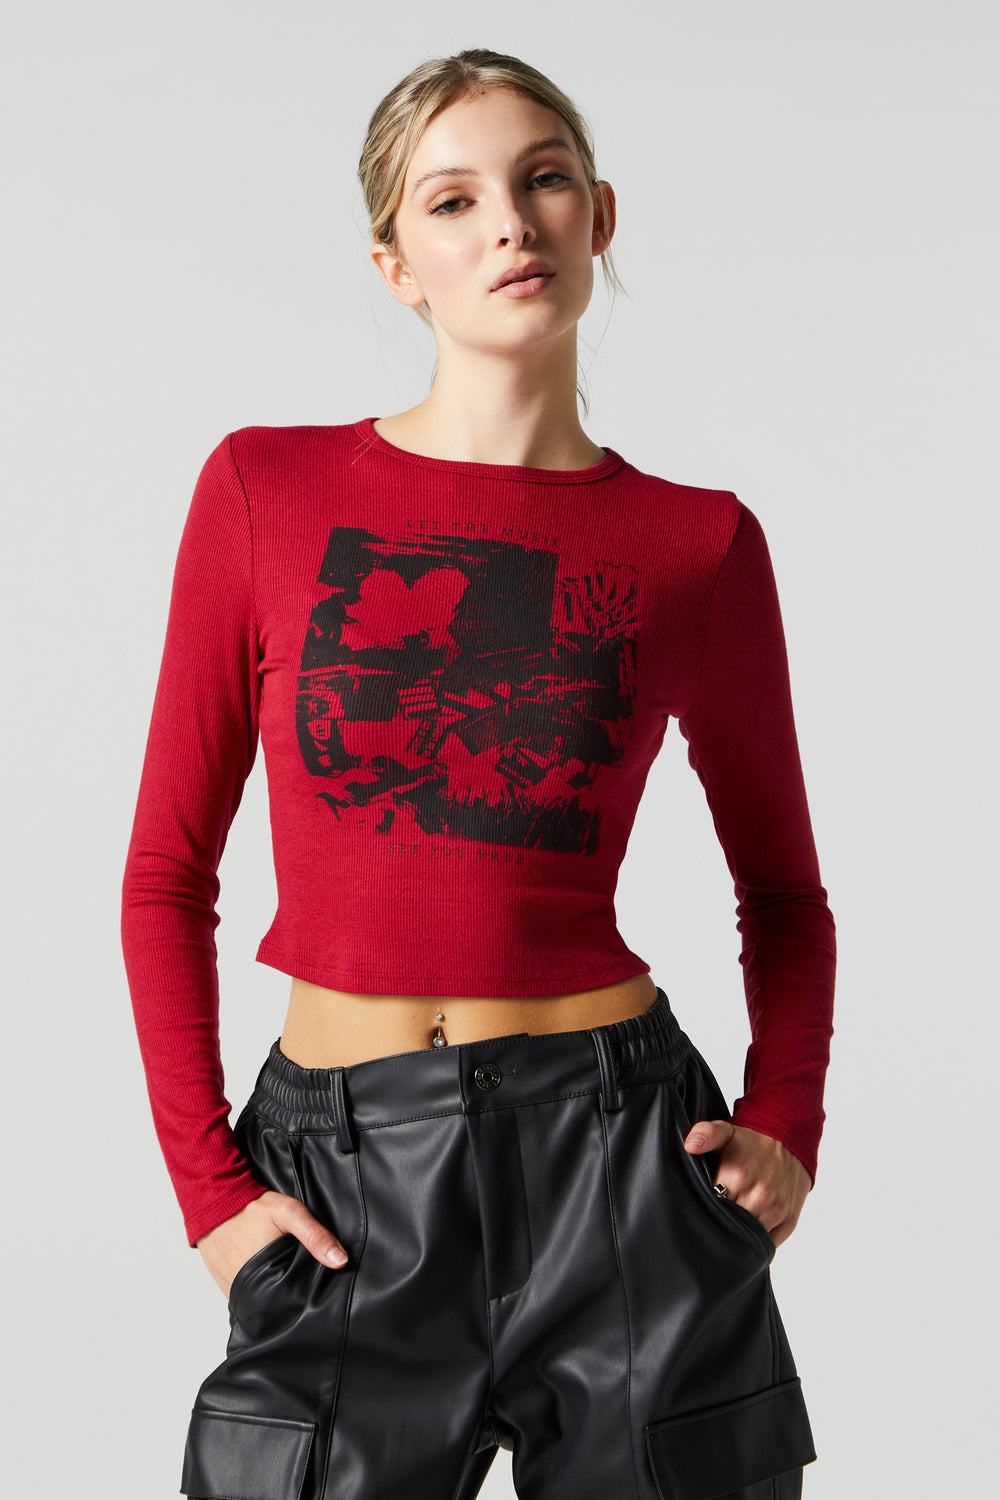 The Music Graphic Long Sleeve Crop Top The Music Graphic Long Sleeve Crop Top 1